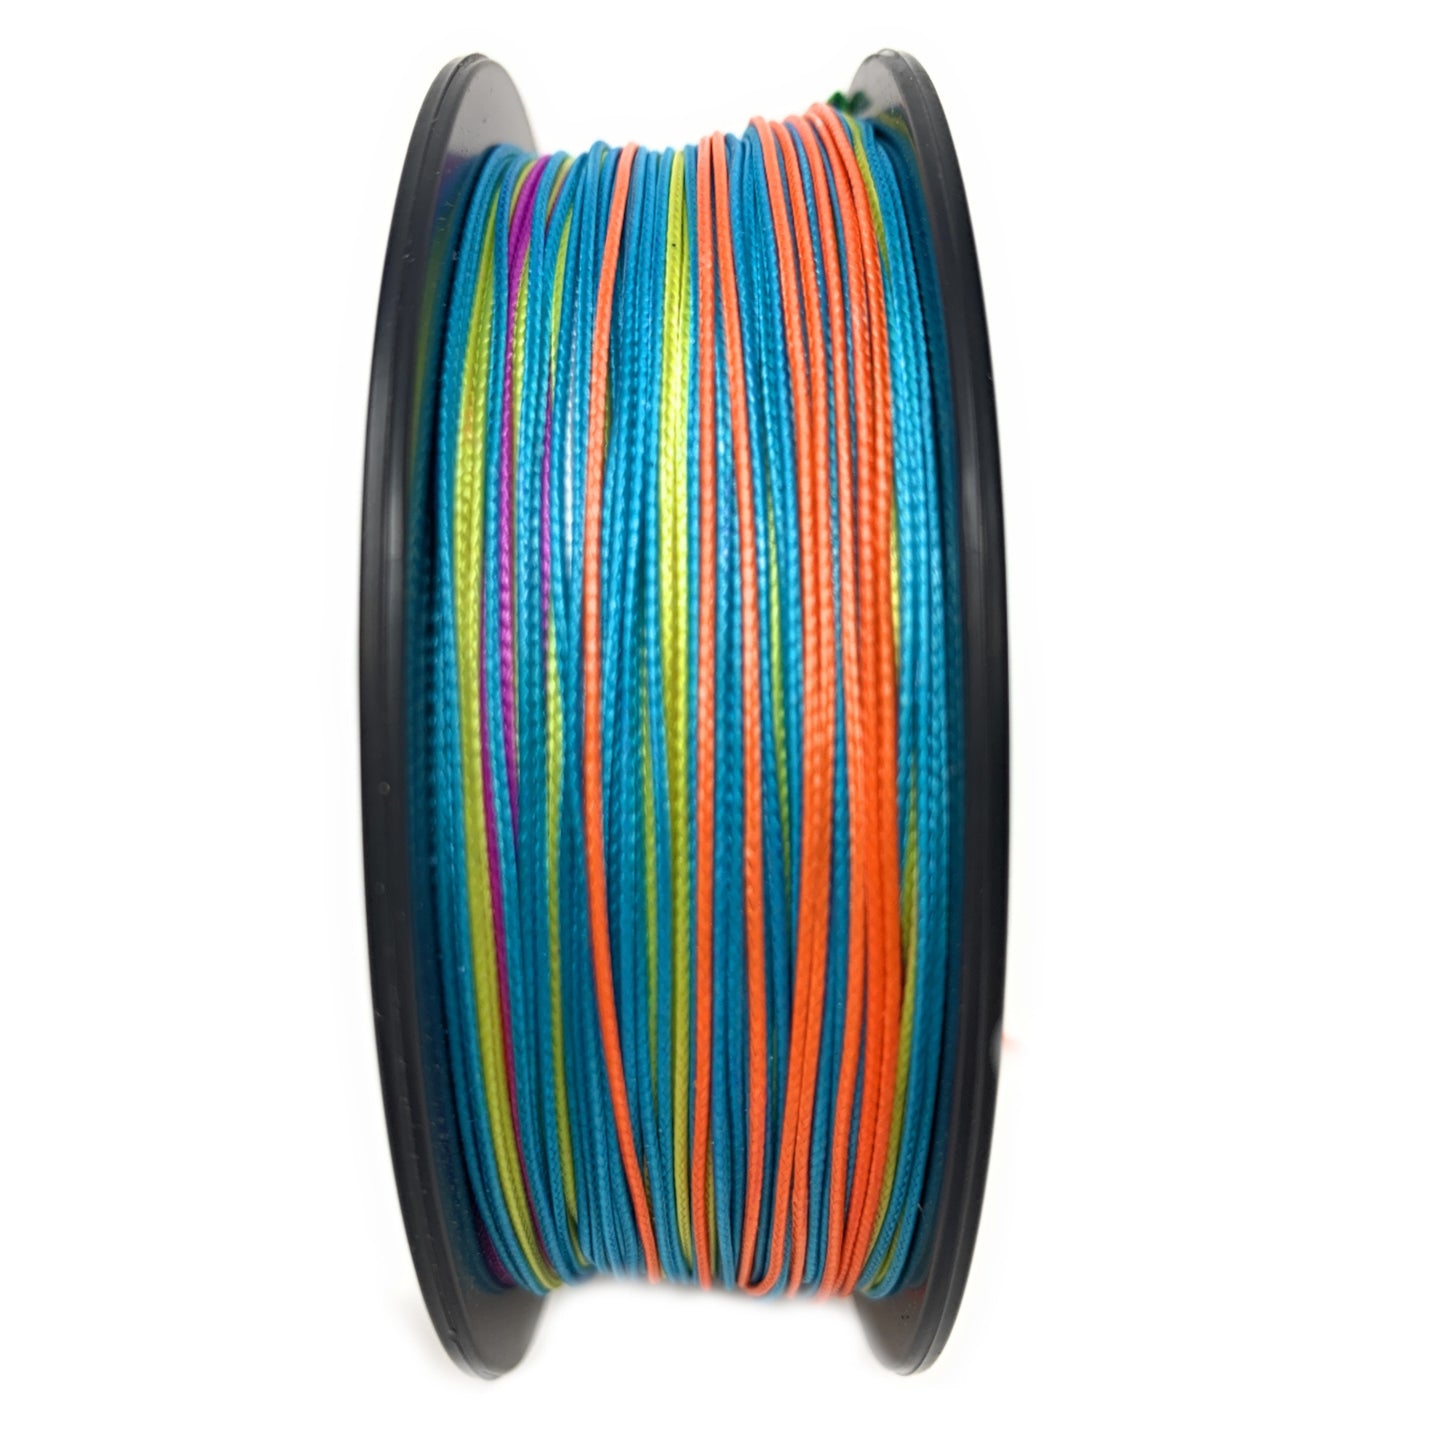 Reaction Tackle Lead Core Metered Trolling Braided Line